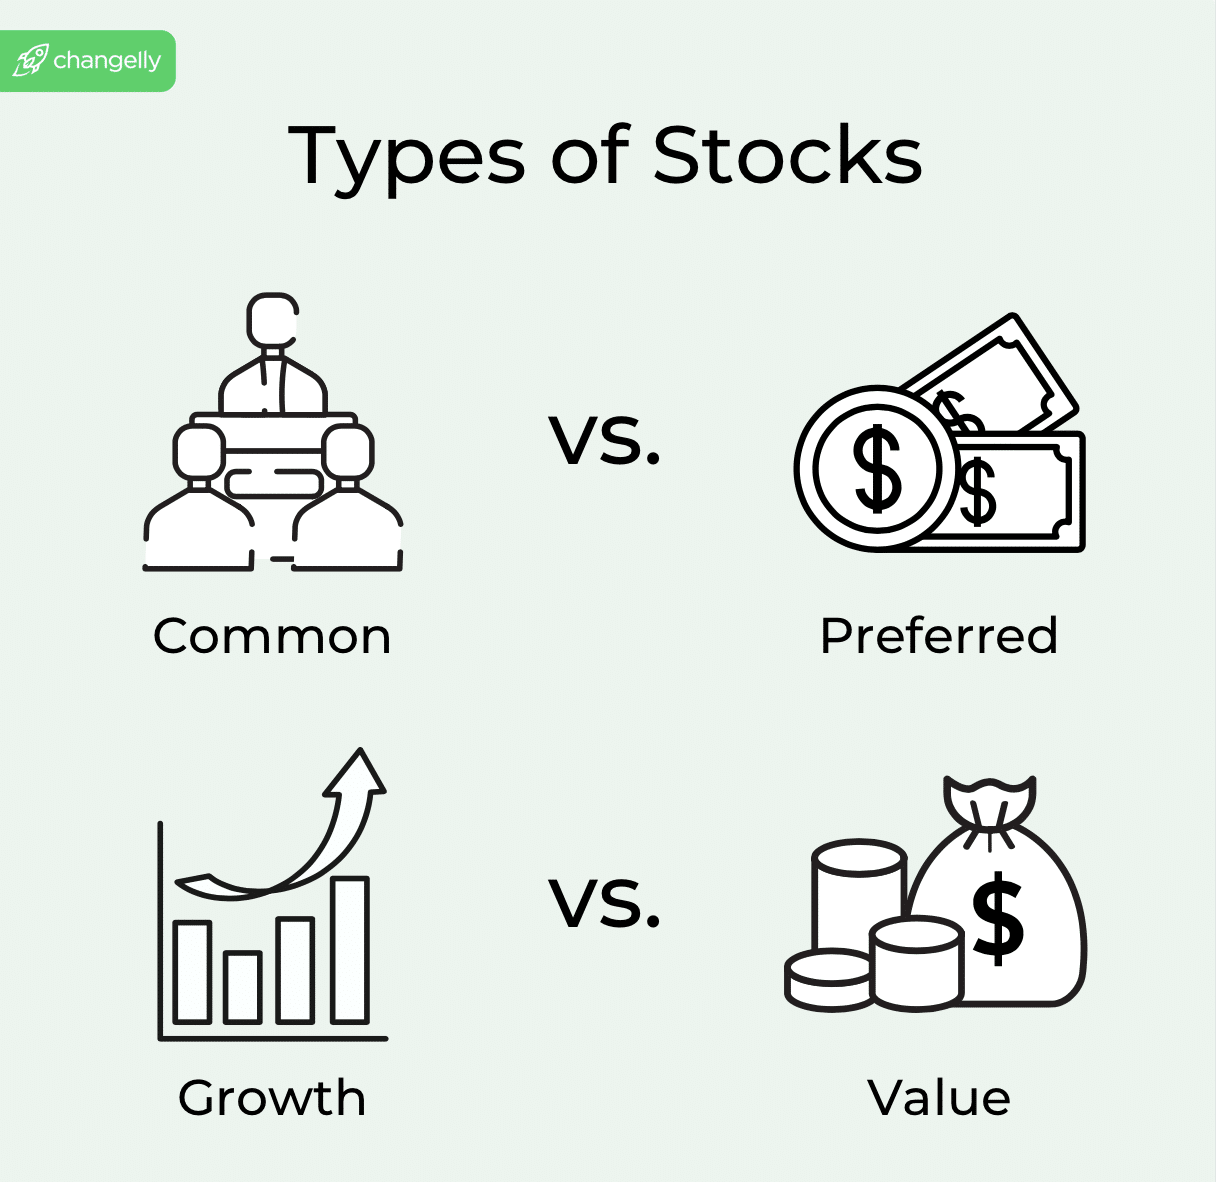 4 main types of stocks you can invest in